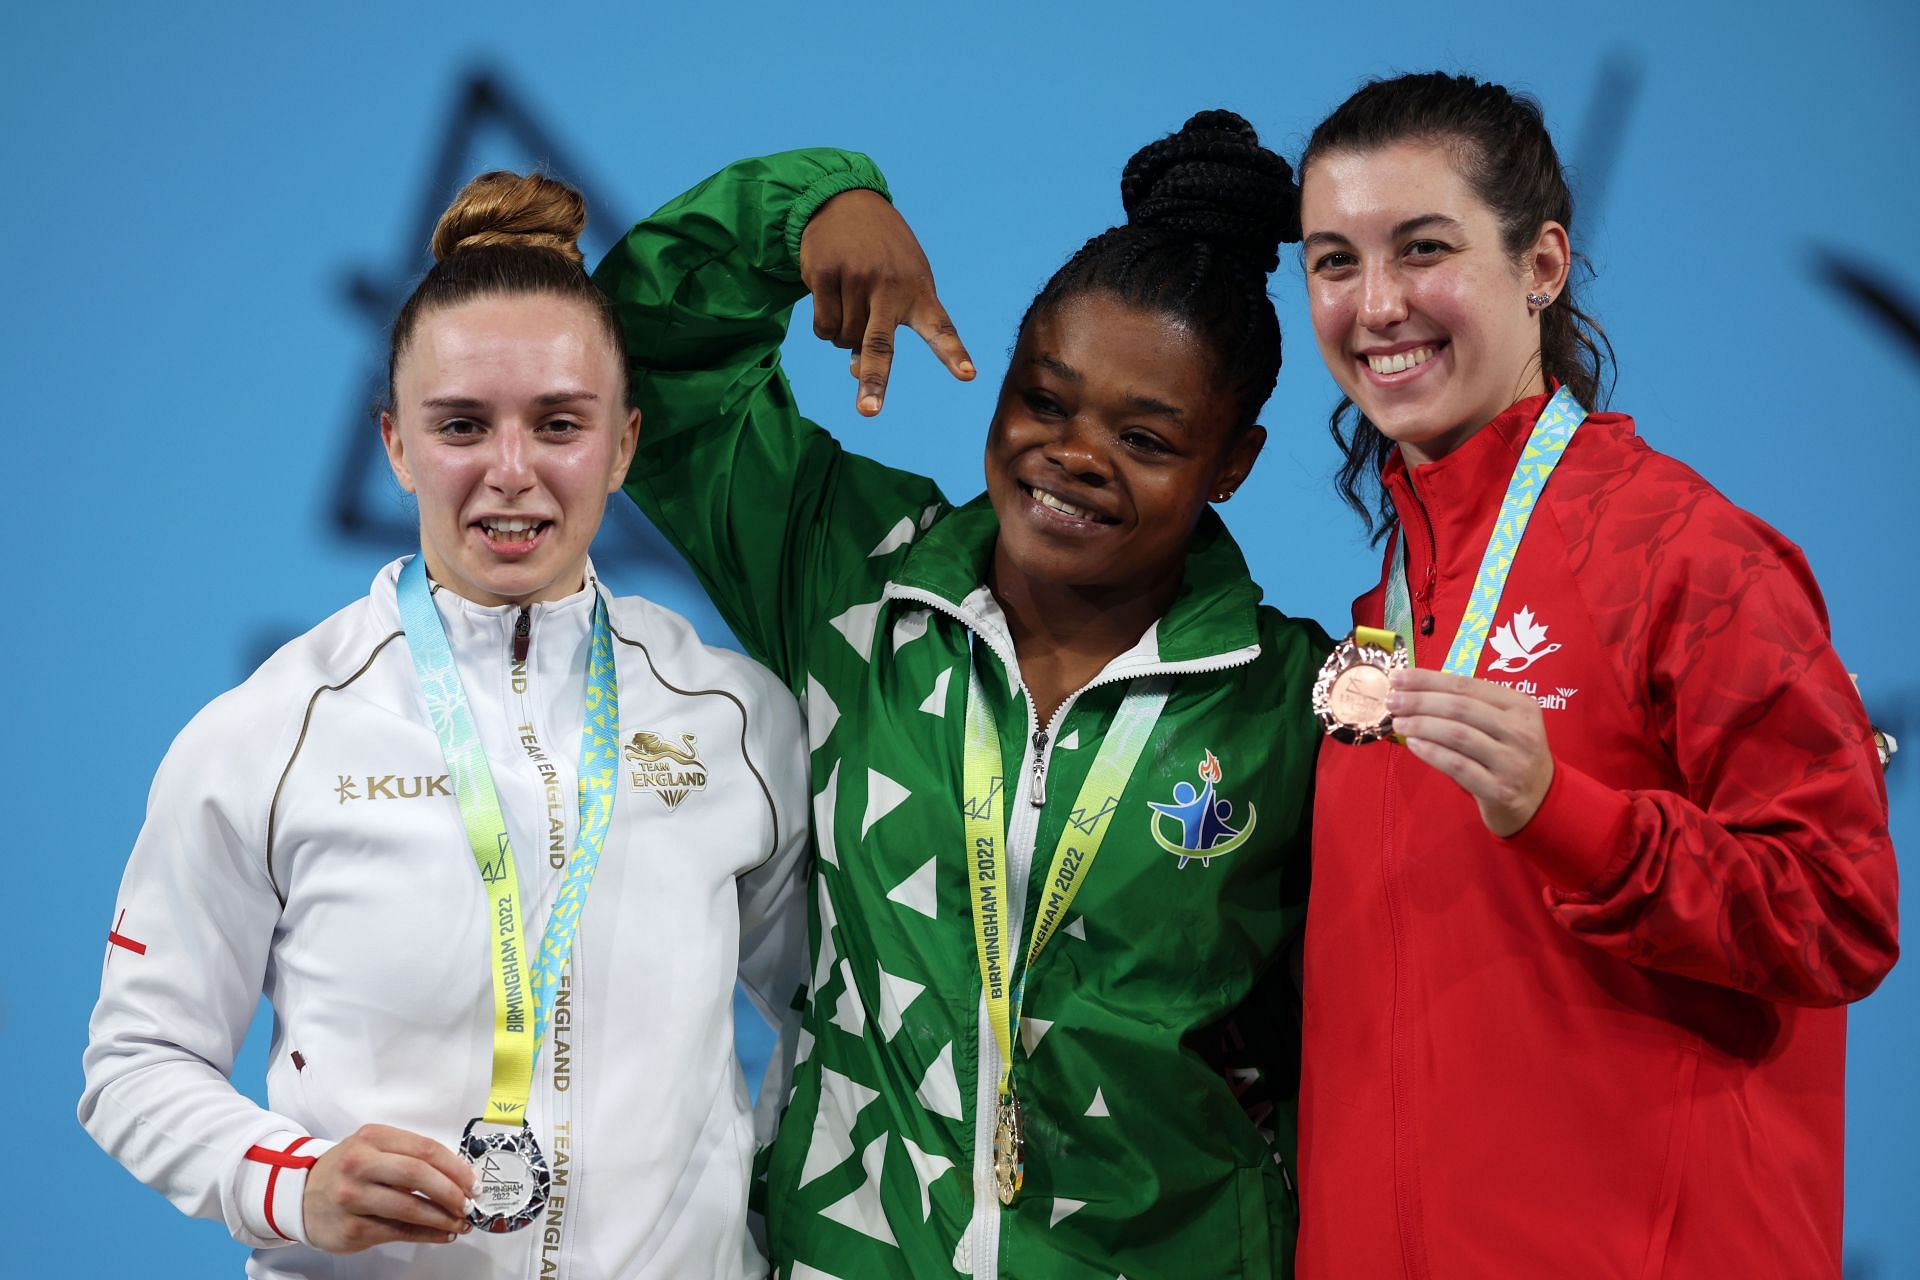 Weightlifting - Commonwealth Games: Day 3 (file photo of the podium finishers)